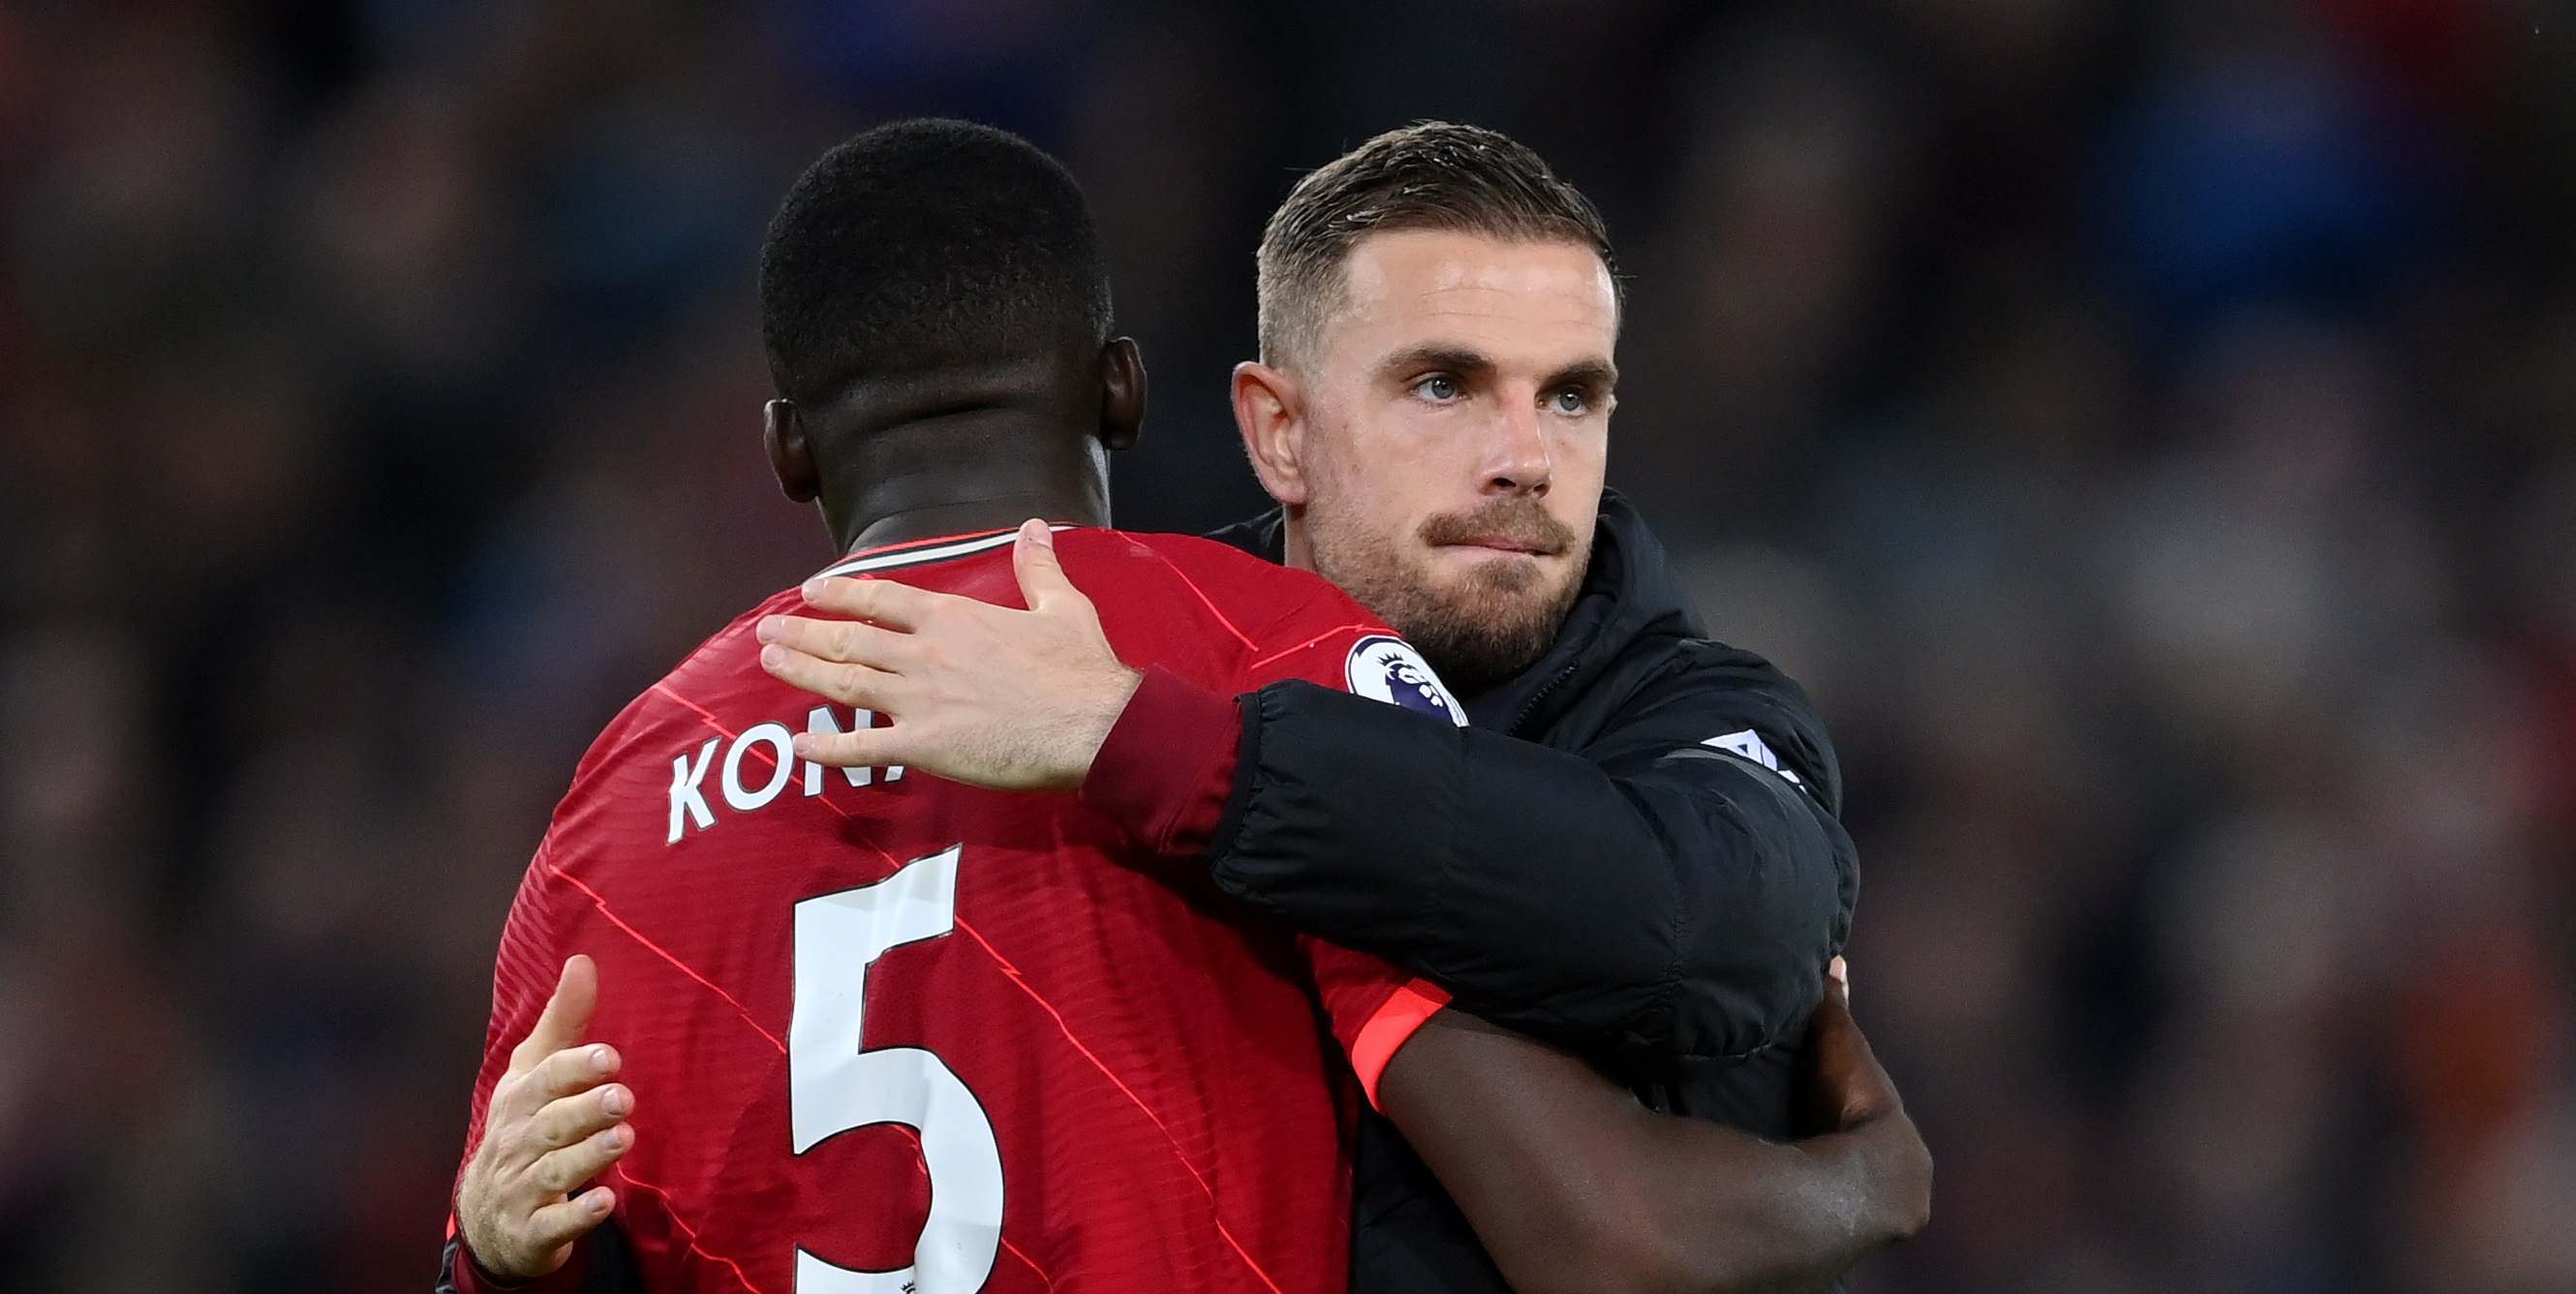 Henderson & Konate selection blows explained ahead of the World Cup